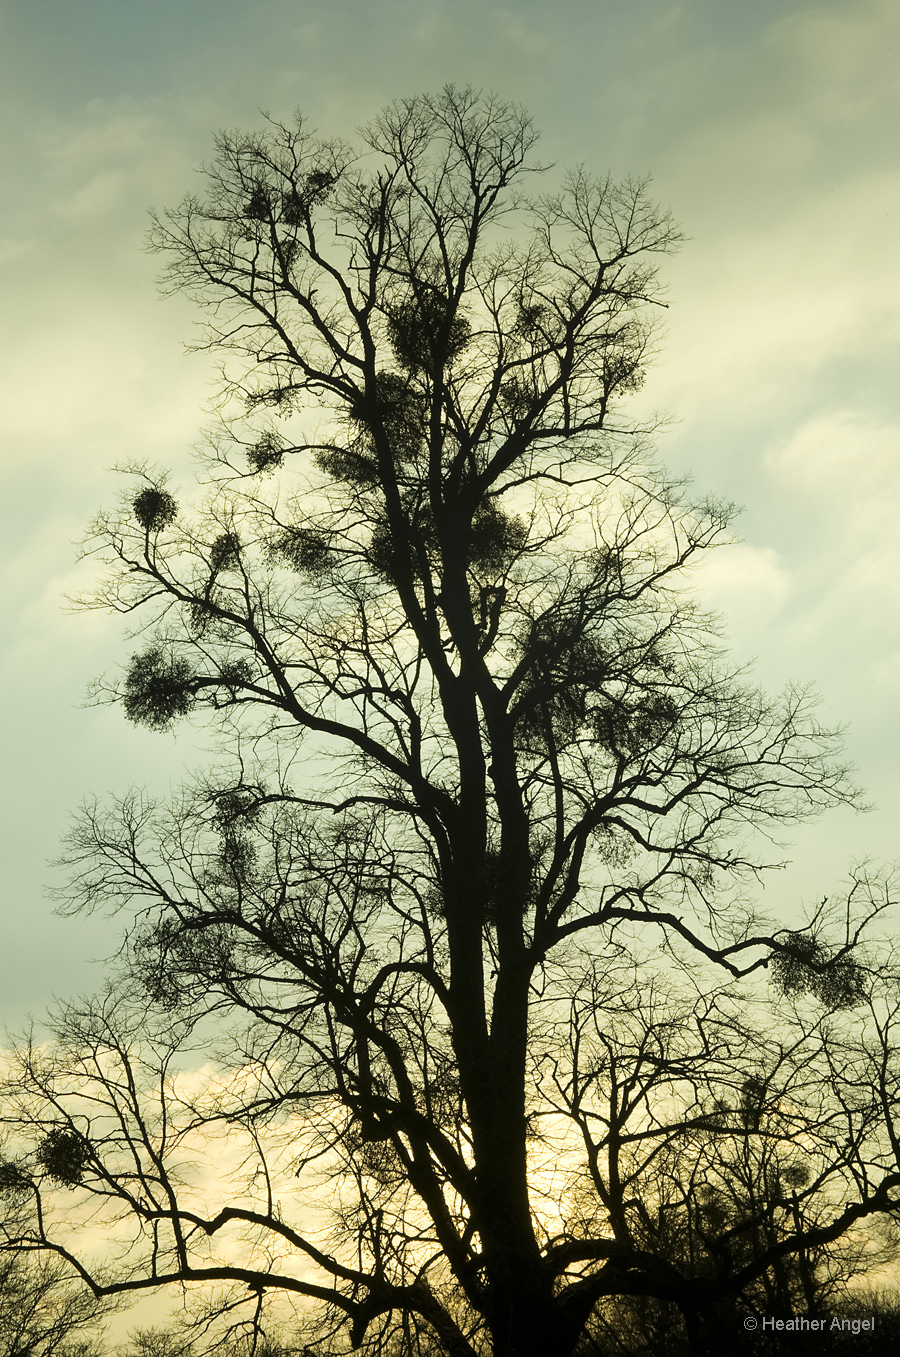 Silhouetted clumps of parasitic mistletoe (Viscum album) are easily counted on a poplar tree in winter